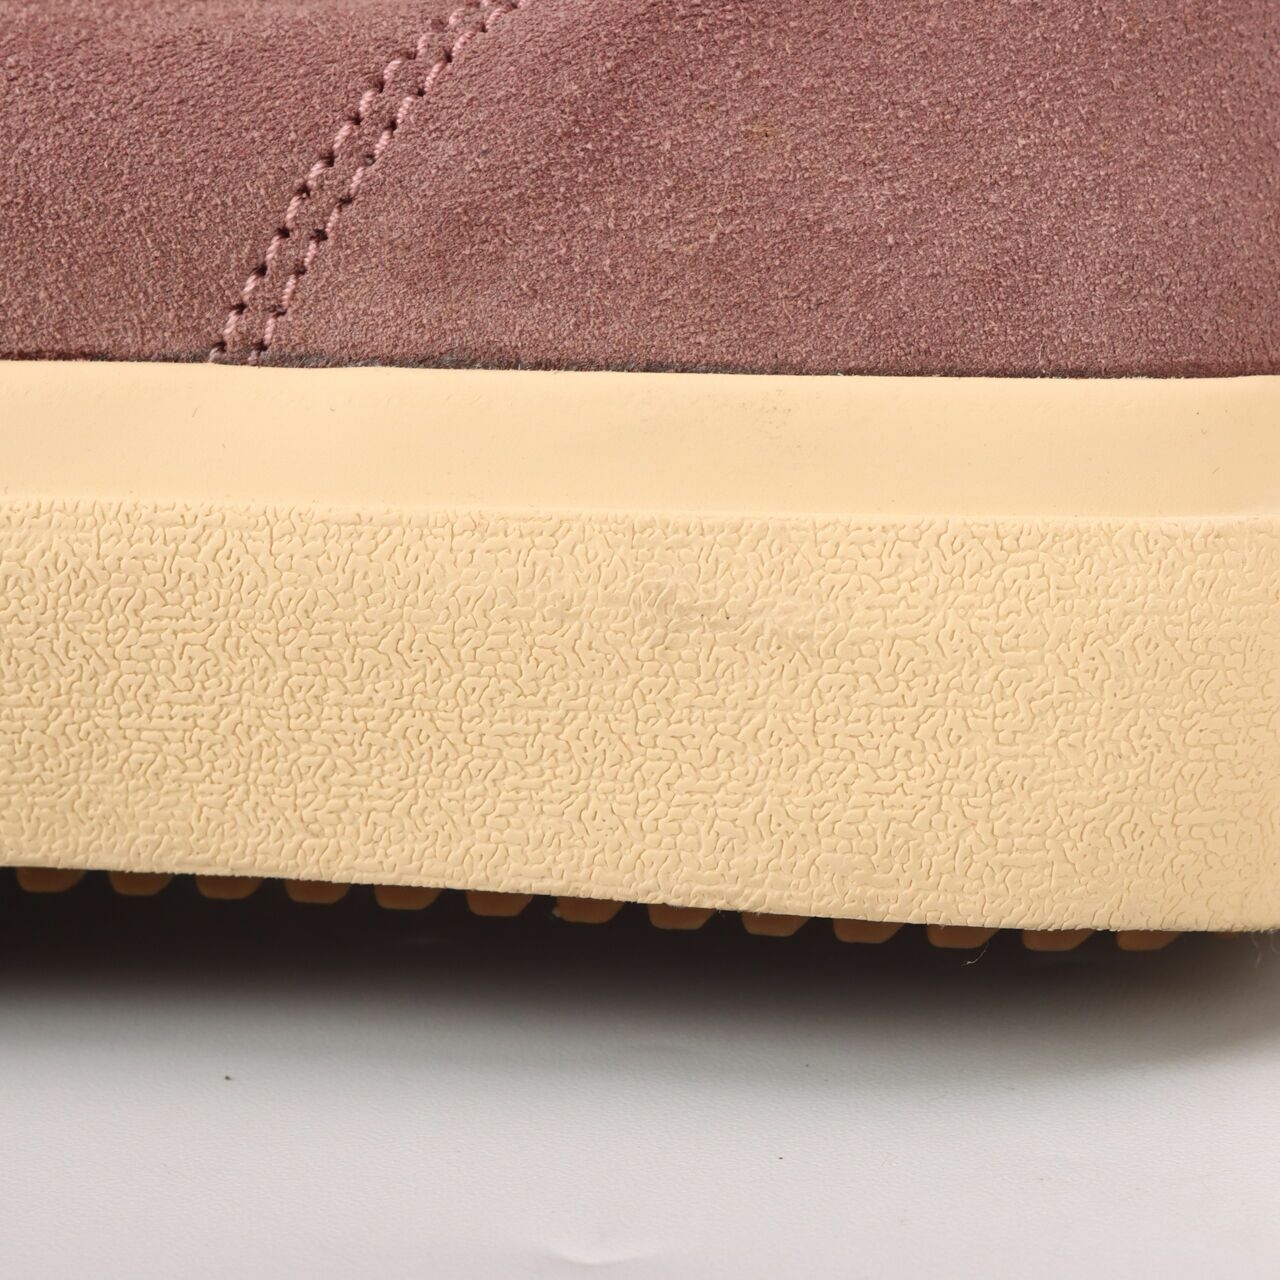 Brodo Pink VTG V.2 50 Shades Of Suede Sneakers